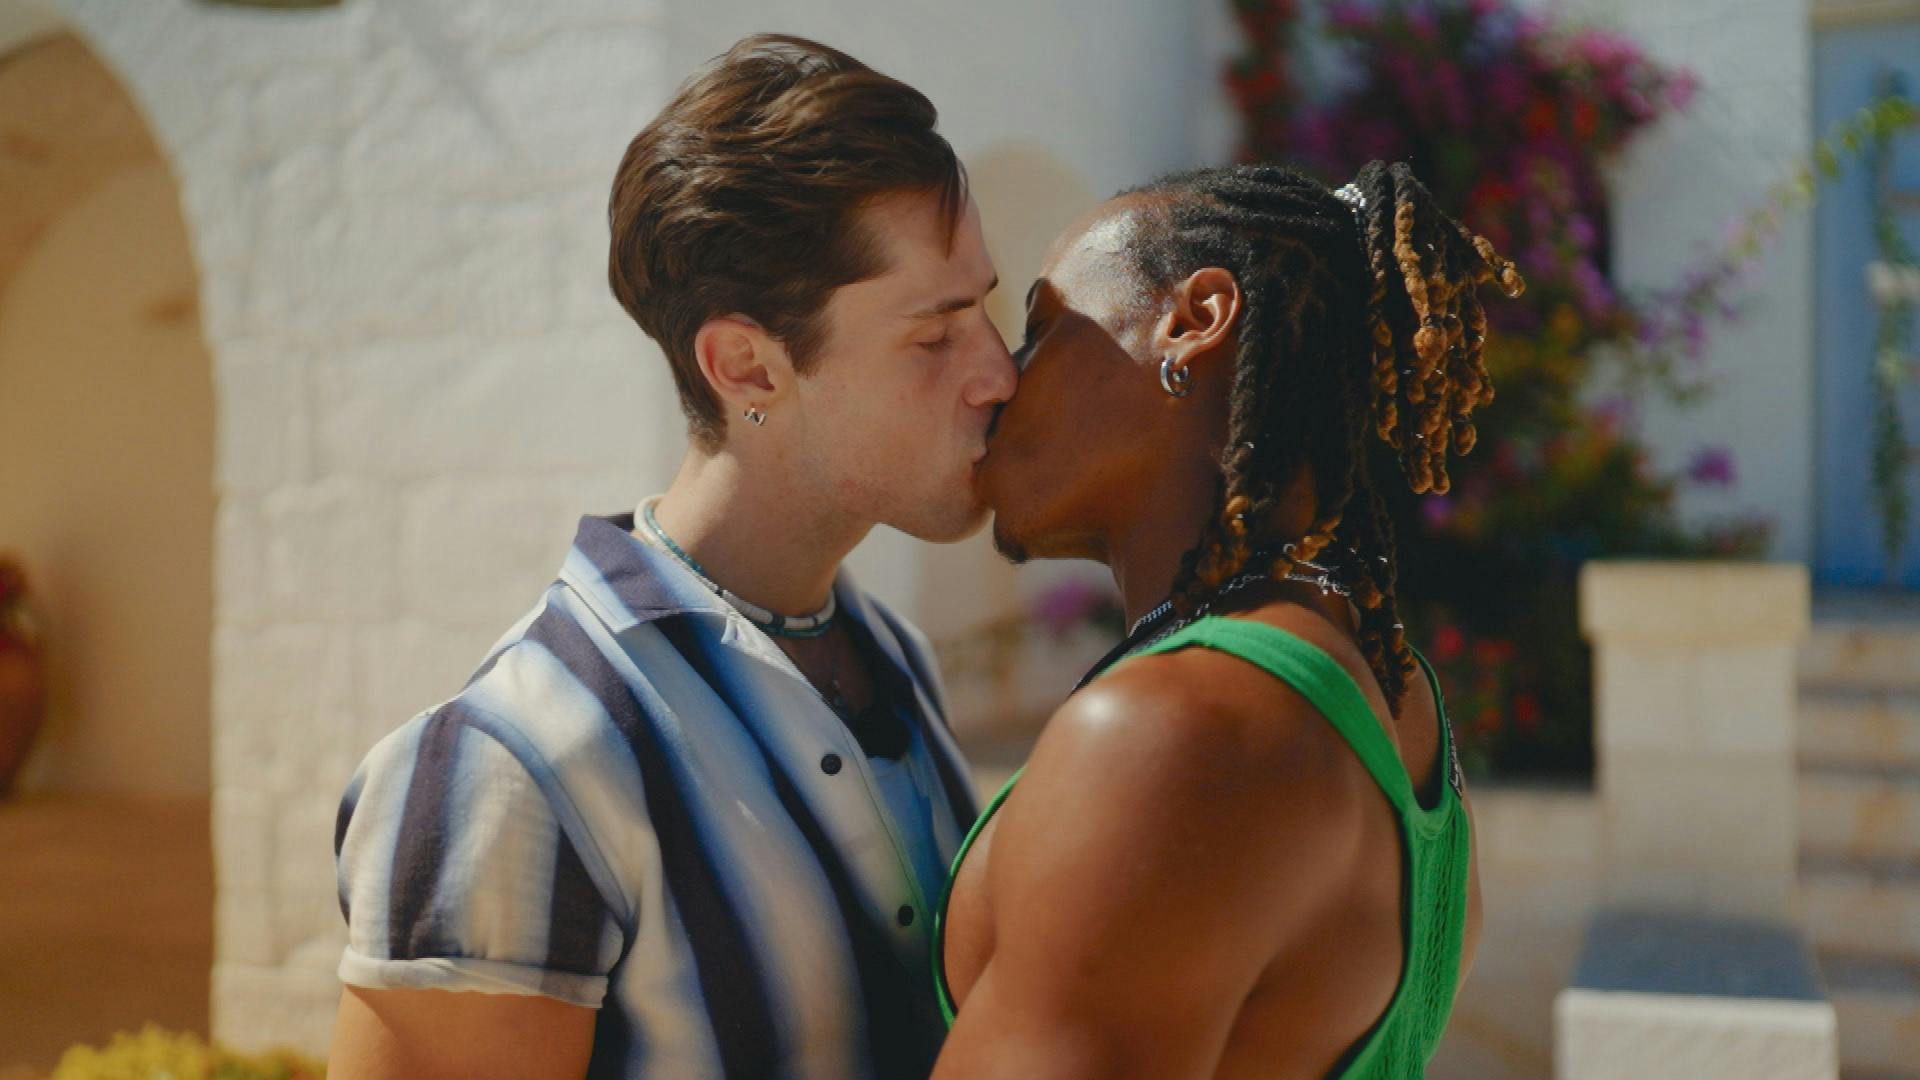 I Kissed A Boy Is The New Queer Dating Series Bringing Much-Needed Diversity To The Reality TV World Life Grazia photo